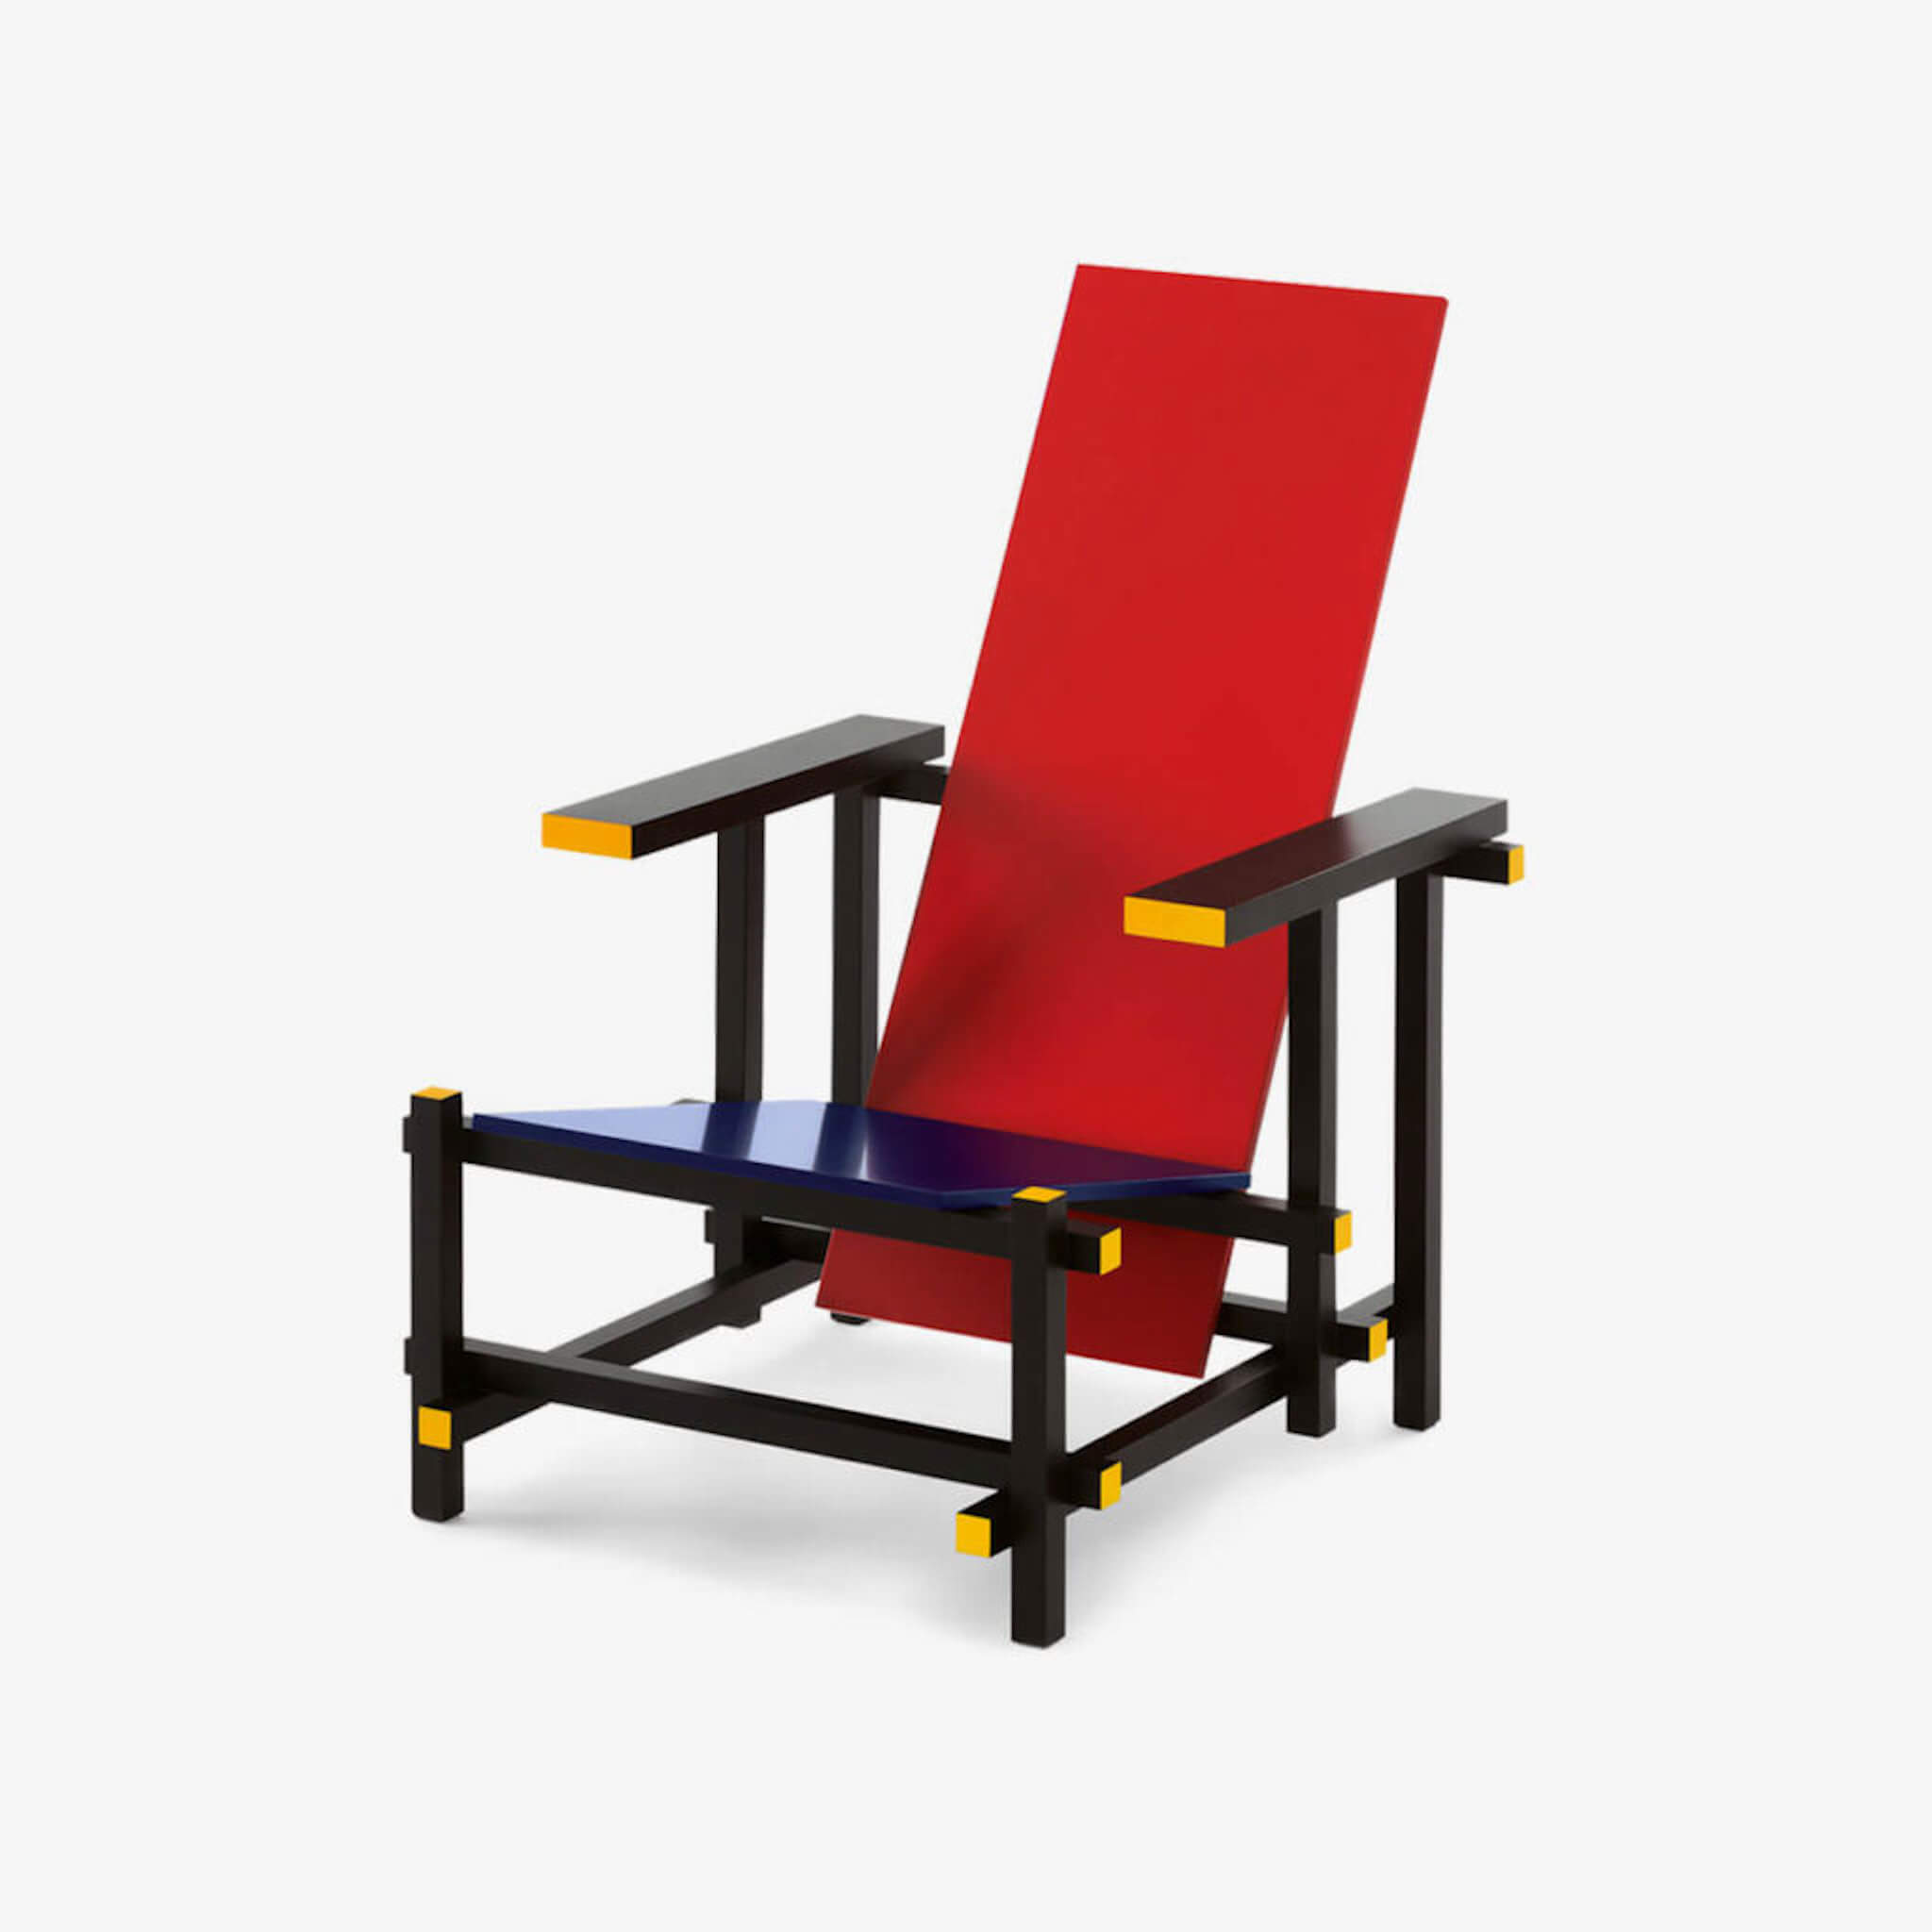 Red & Blue Chair by Gerrit Rietveld (replica)